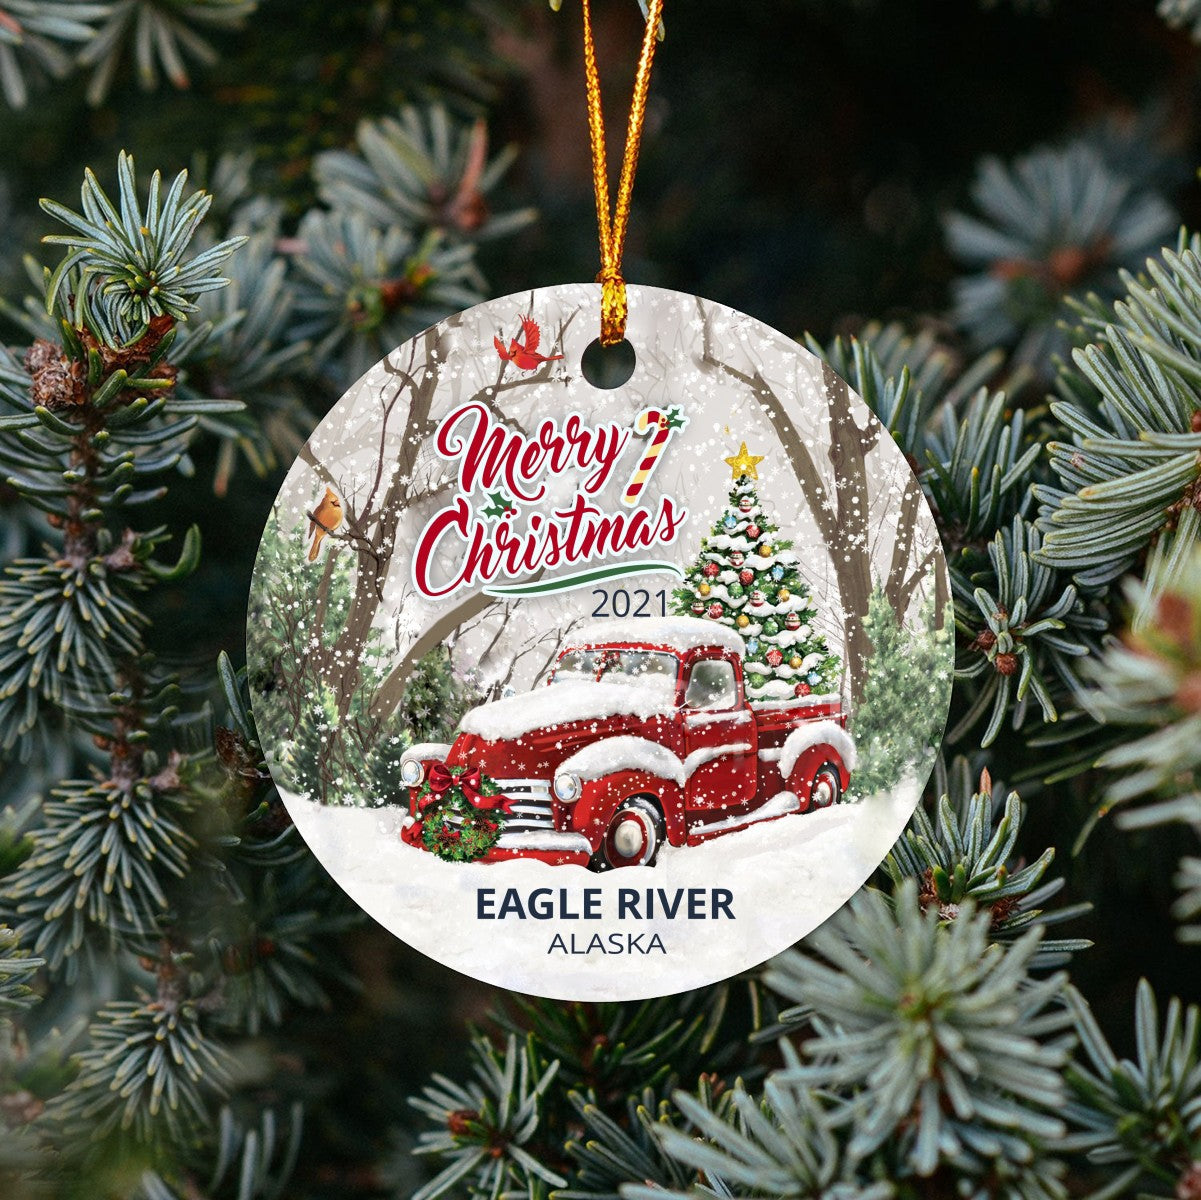 Christmas Tree Ornaments Eagle River - Ornament Customize With Name City And State Eagle River Alaska AK - Red Truck Xmas Ornaments 3'' Plastic Gift For Family, Friend And Housewarming